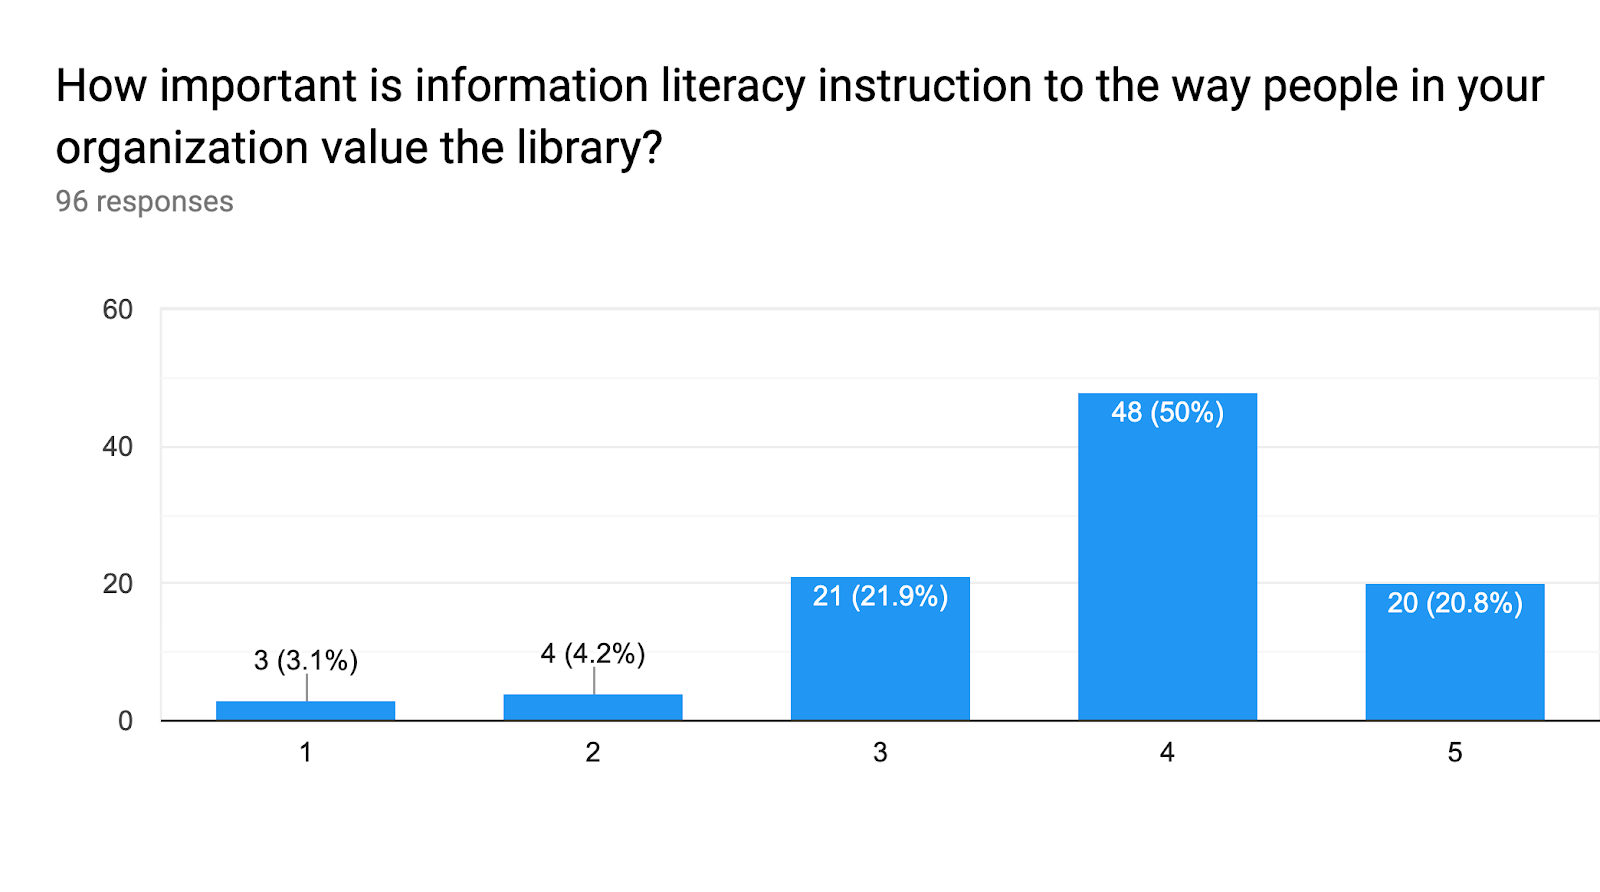 Forms response chart. Question title: How important is information literacy instruction to the way people in your organization value the library?. Number of responses: 96 responses.